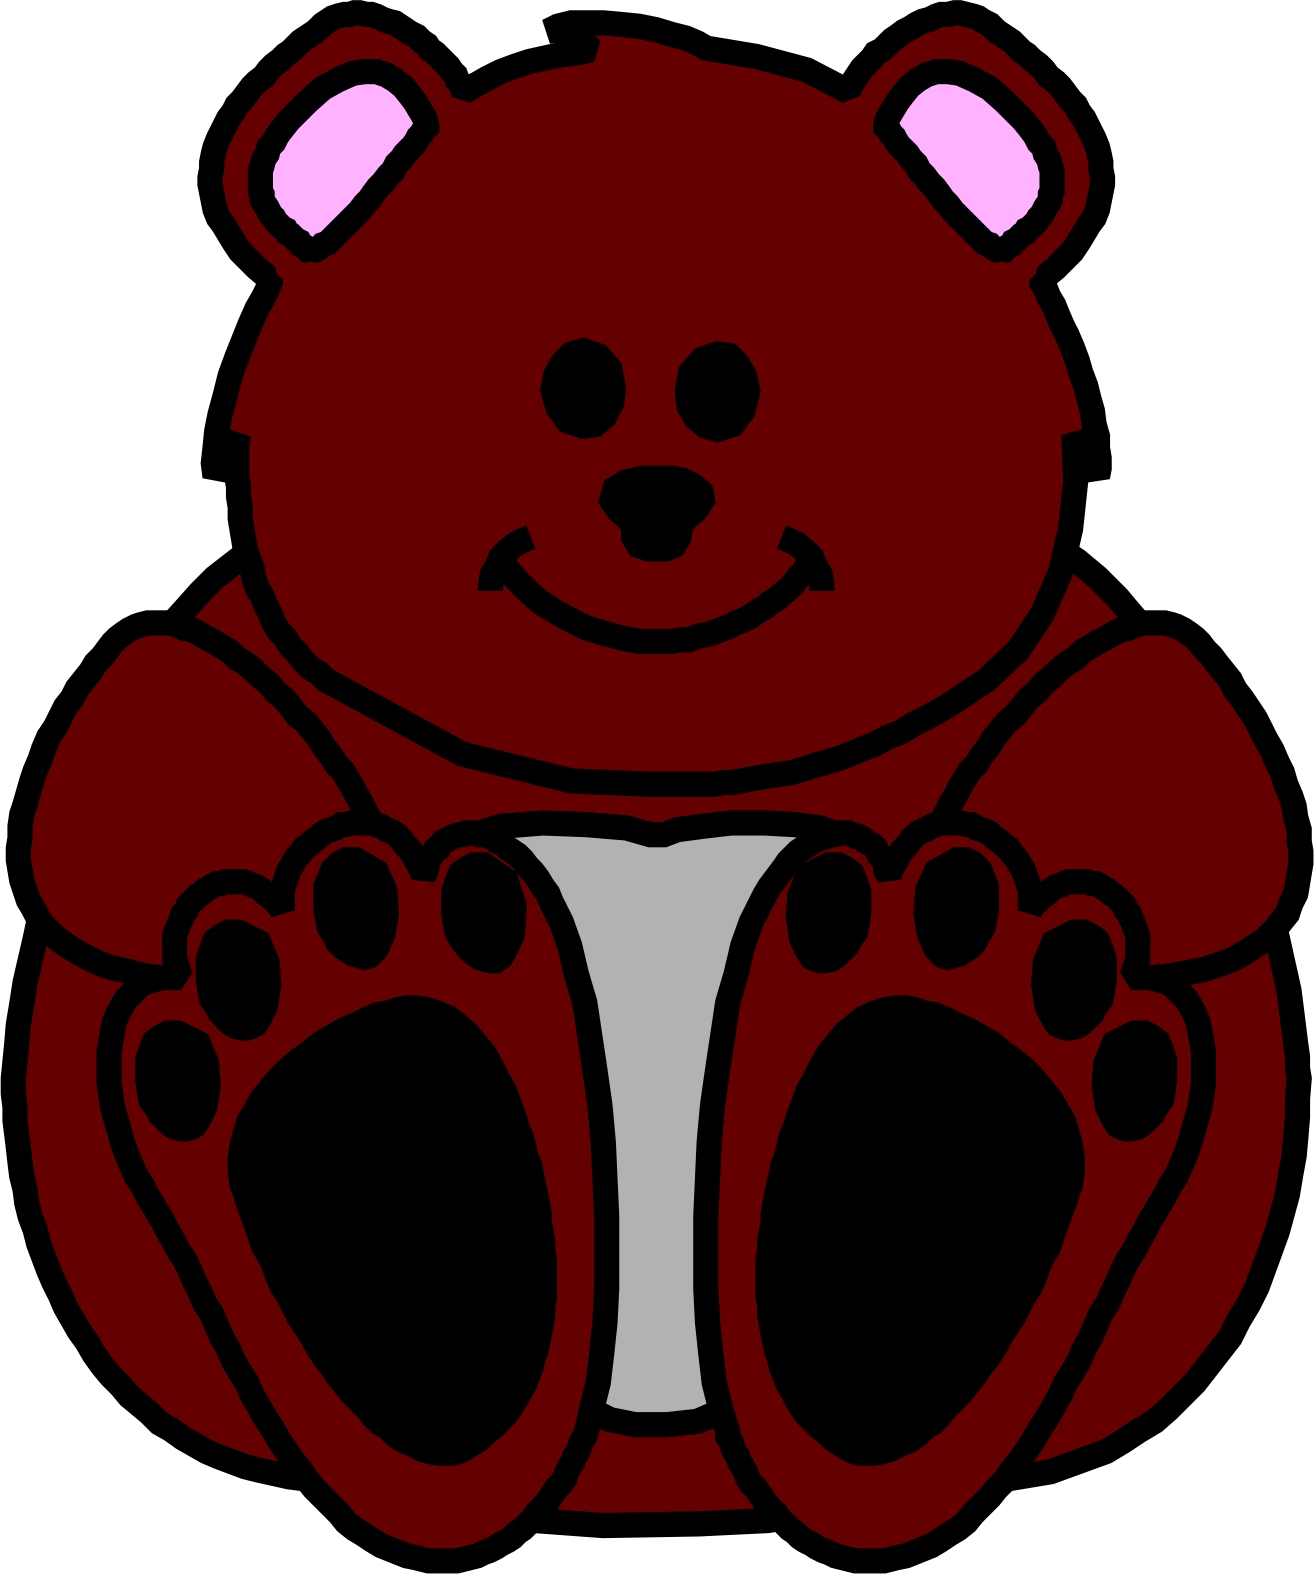 Pictures Of Cartoon Bears - ClipArt Best